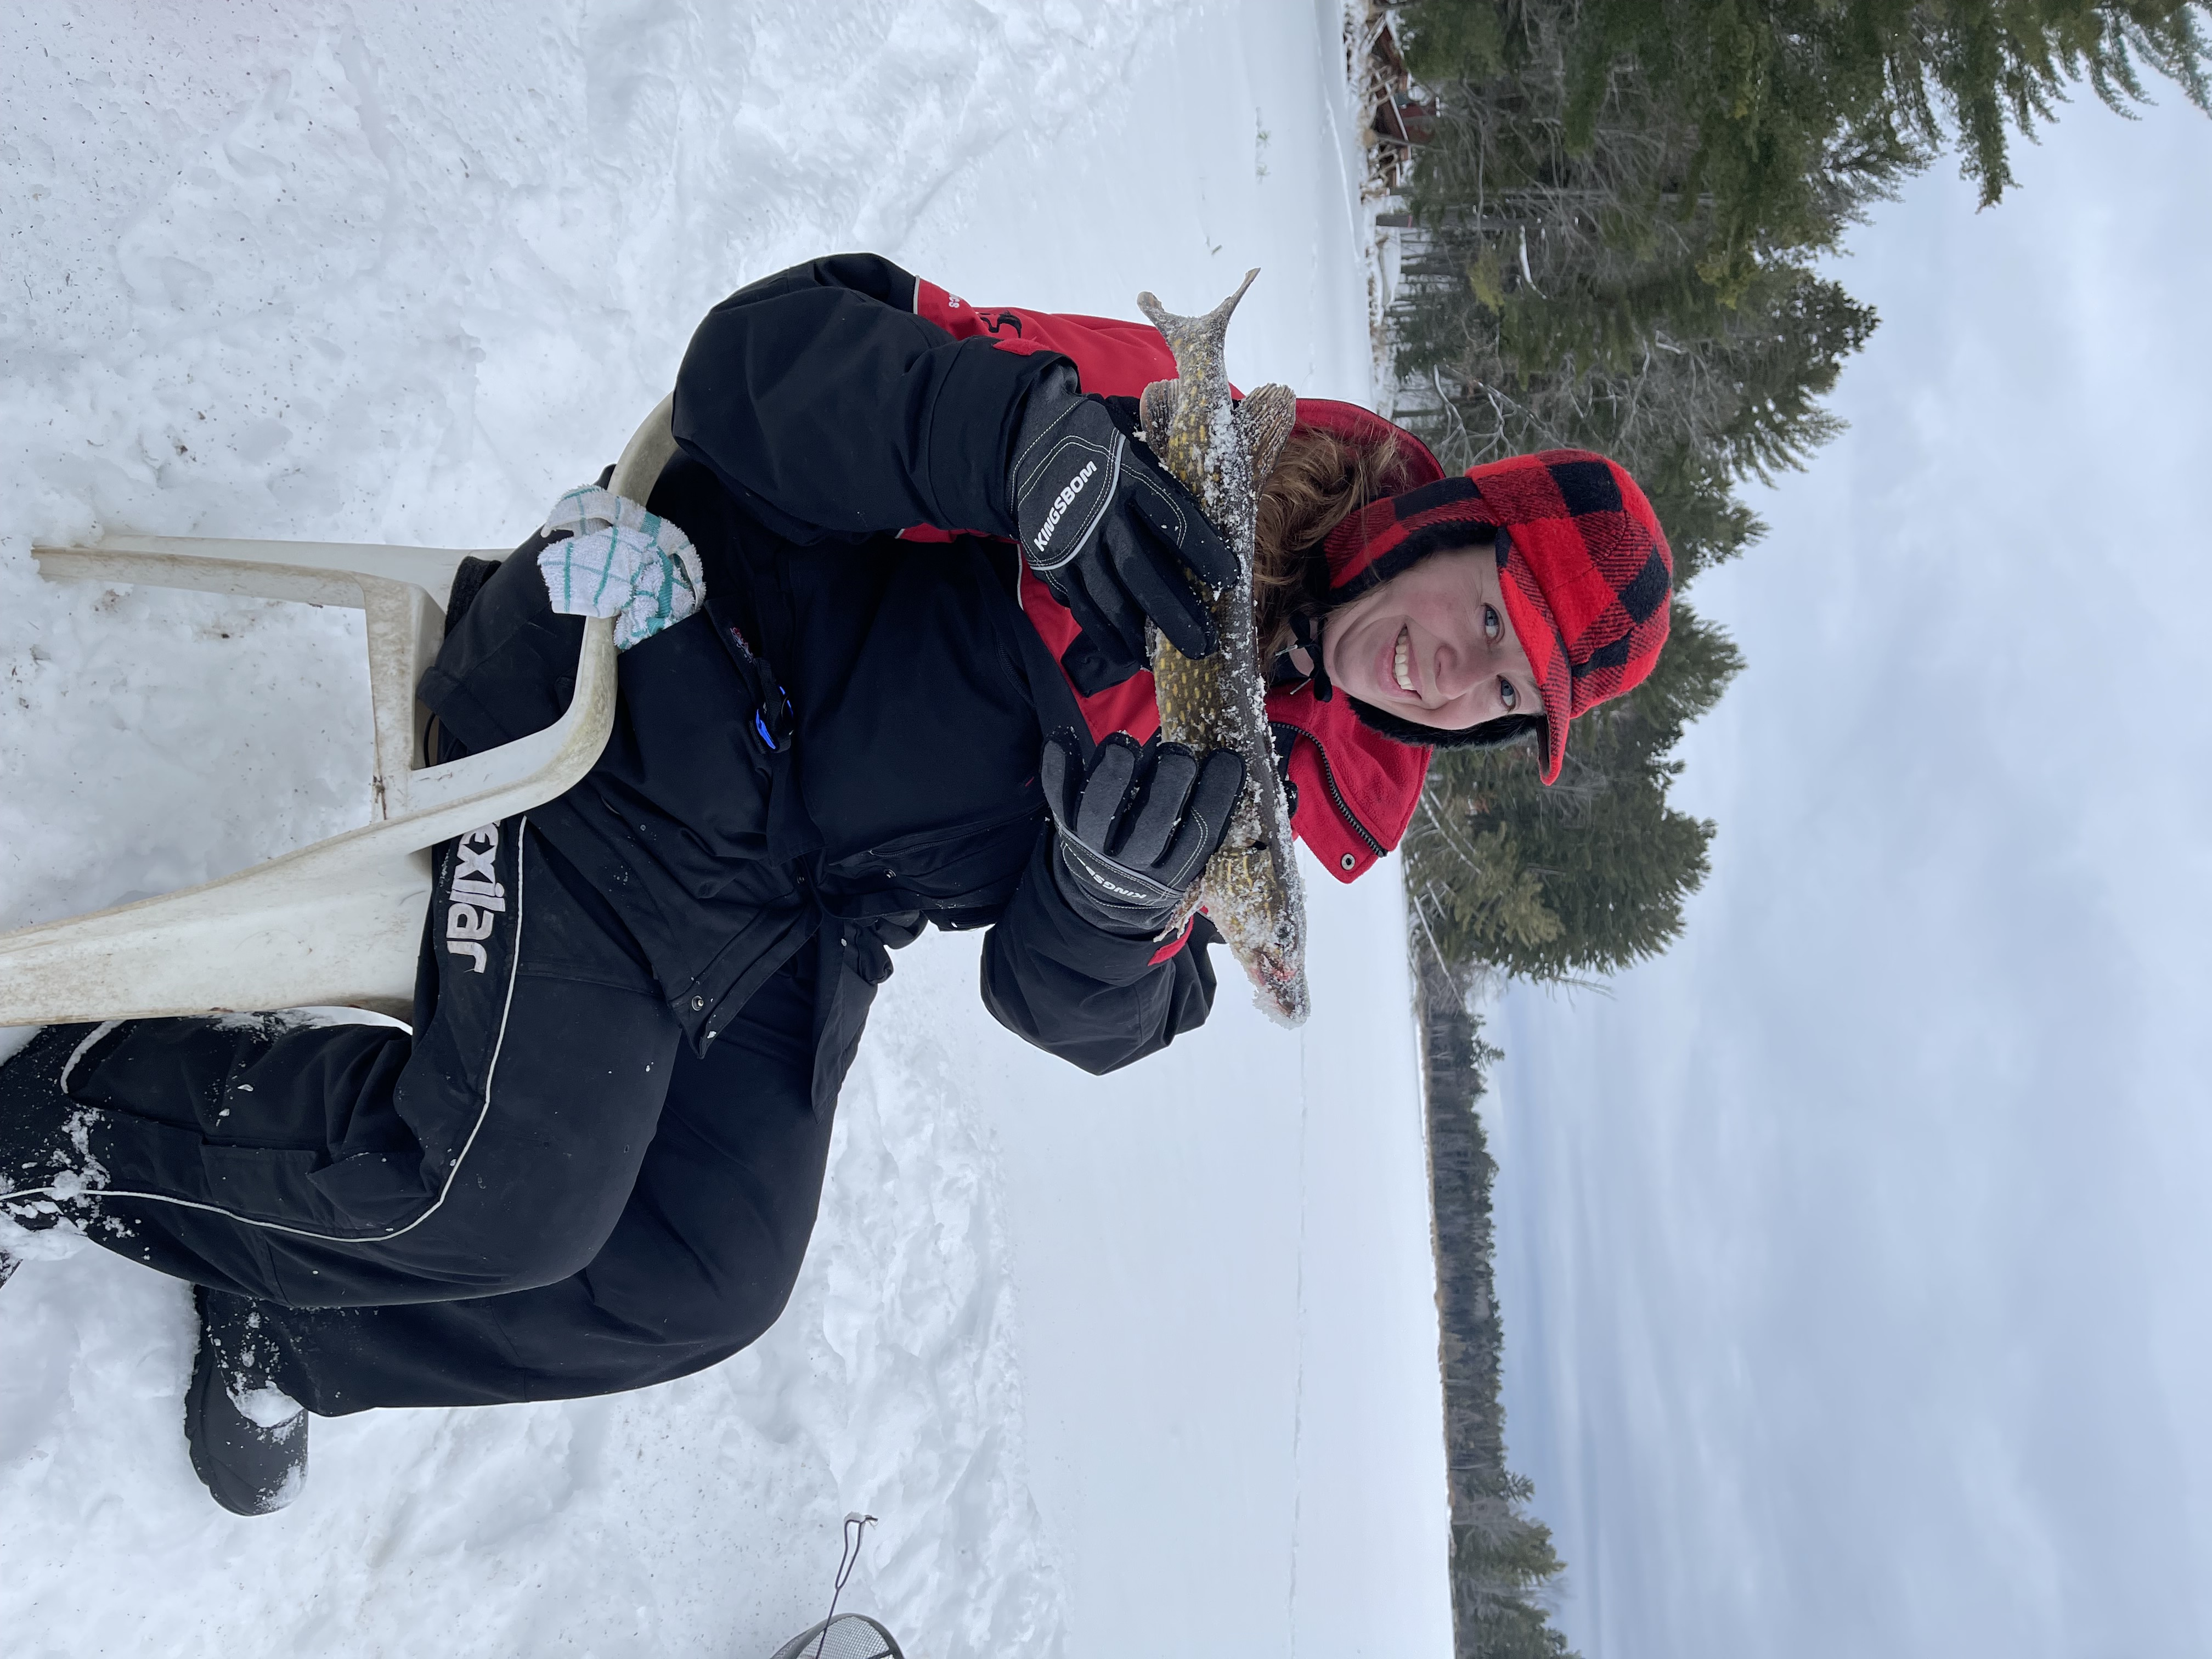 Attorney Ryan Billings and his wife Megan are ice fishing enthusiasts. Megan proudly shows off a catch while ice fishing.